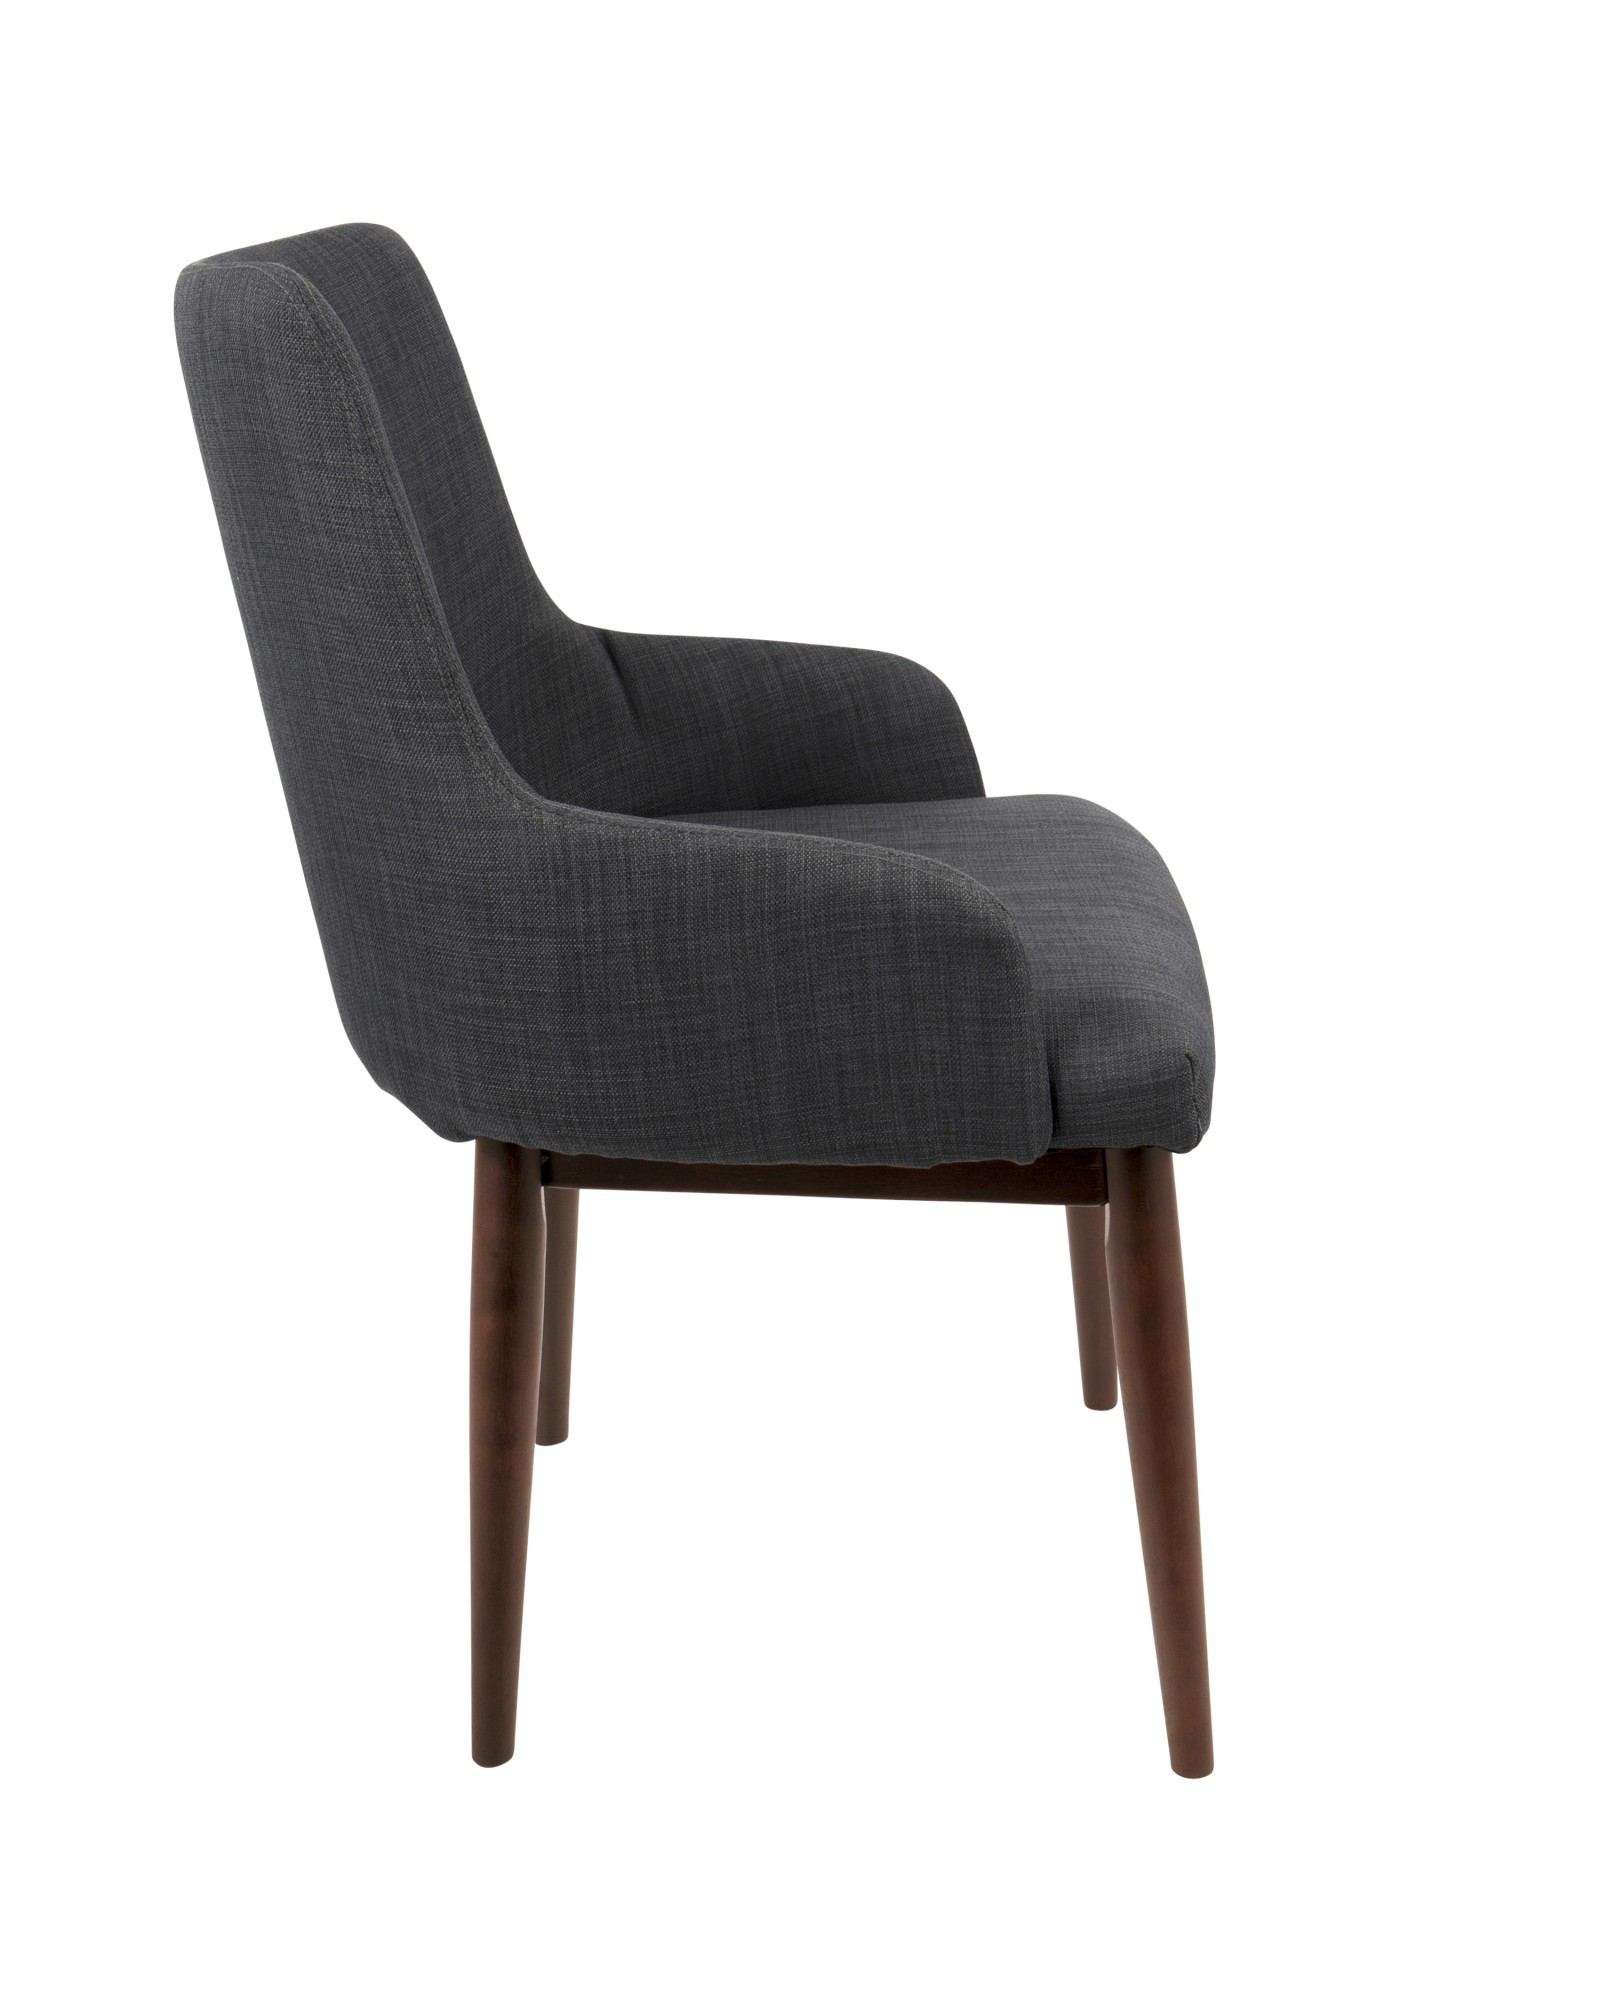 Santiago Mid-Century Modern Dining/Accent Chair in Walnut with Charcoal Fabric - Set of 2